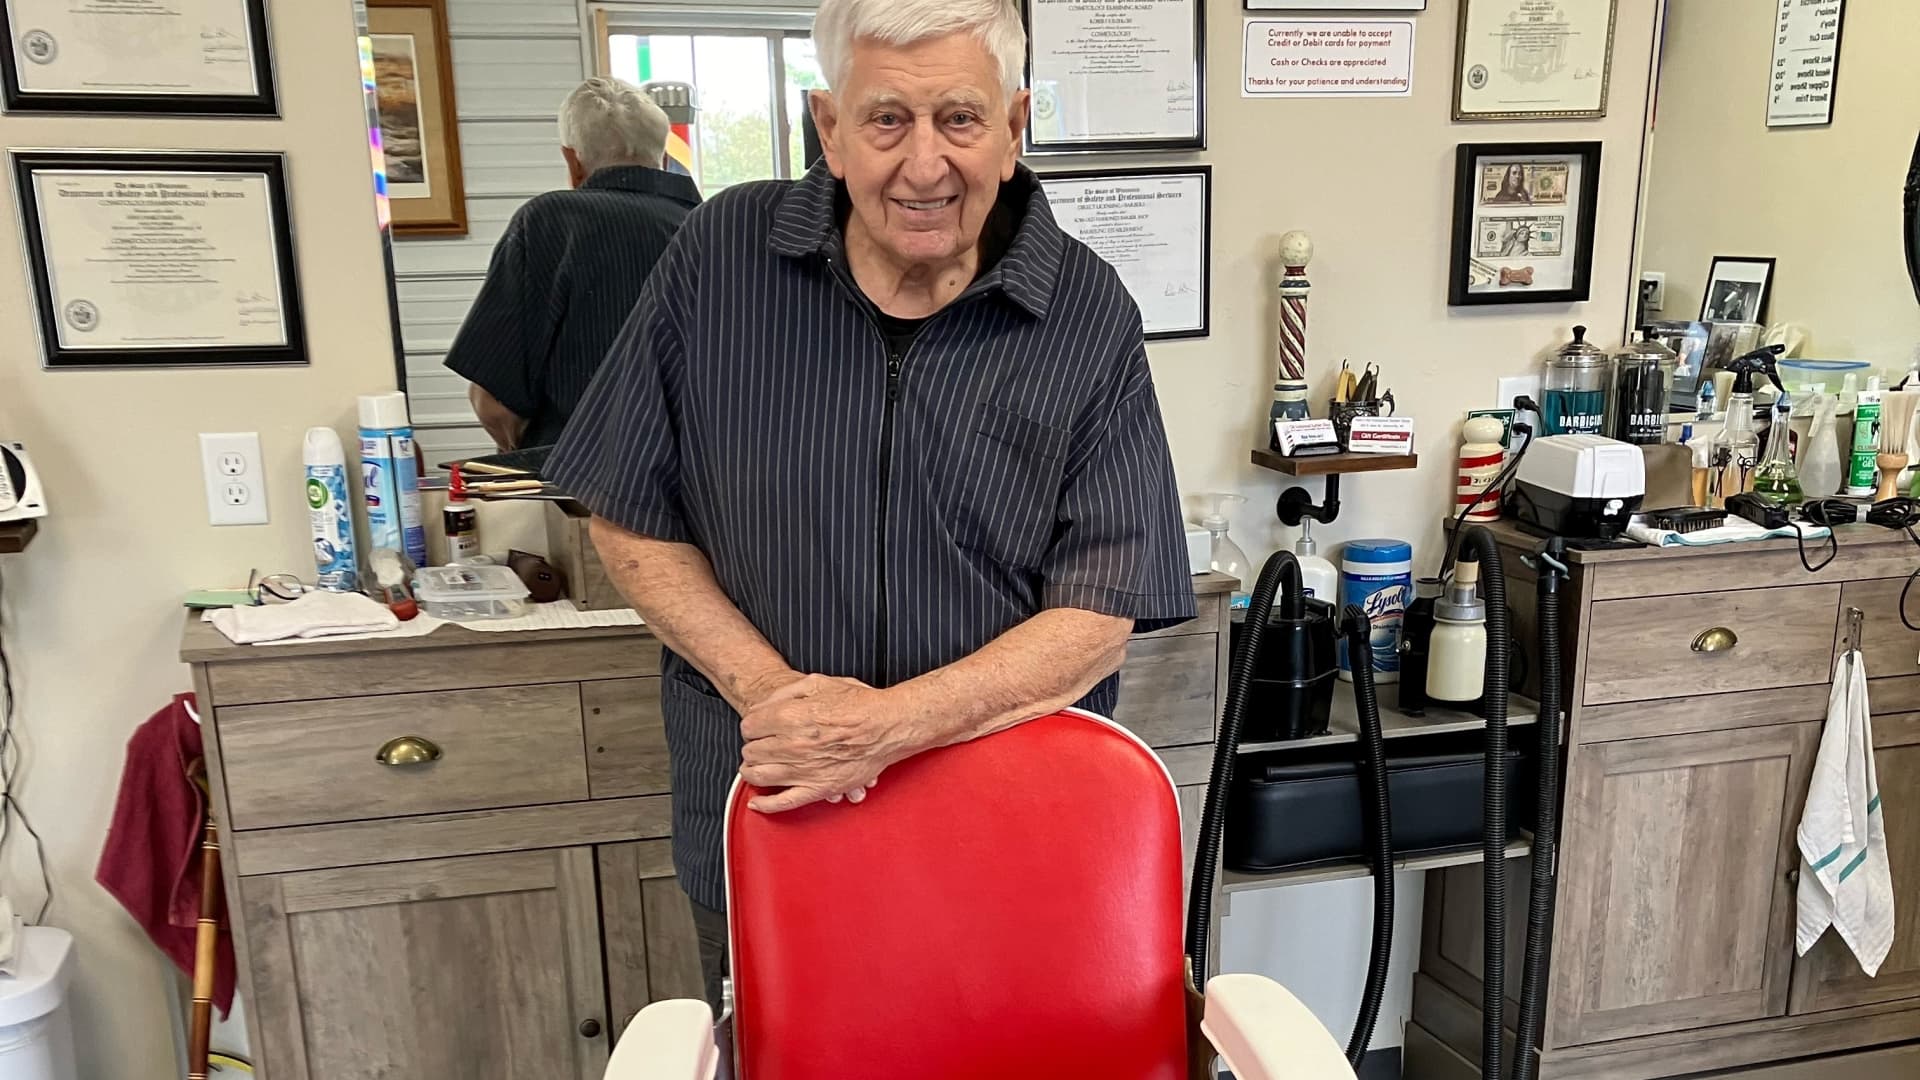 This 91-year-old just opened a barber shop in Wisconsin: ‘I’m too happy to quit’